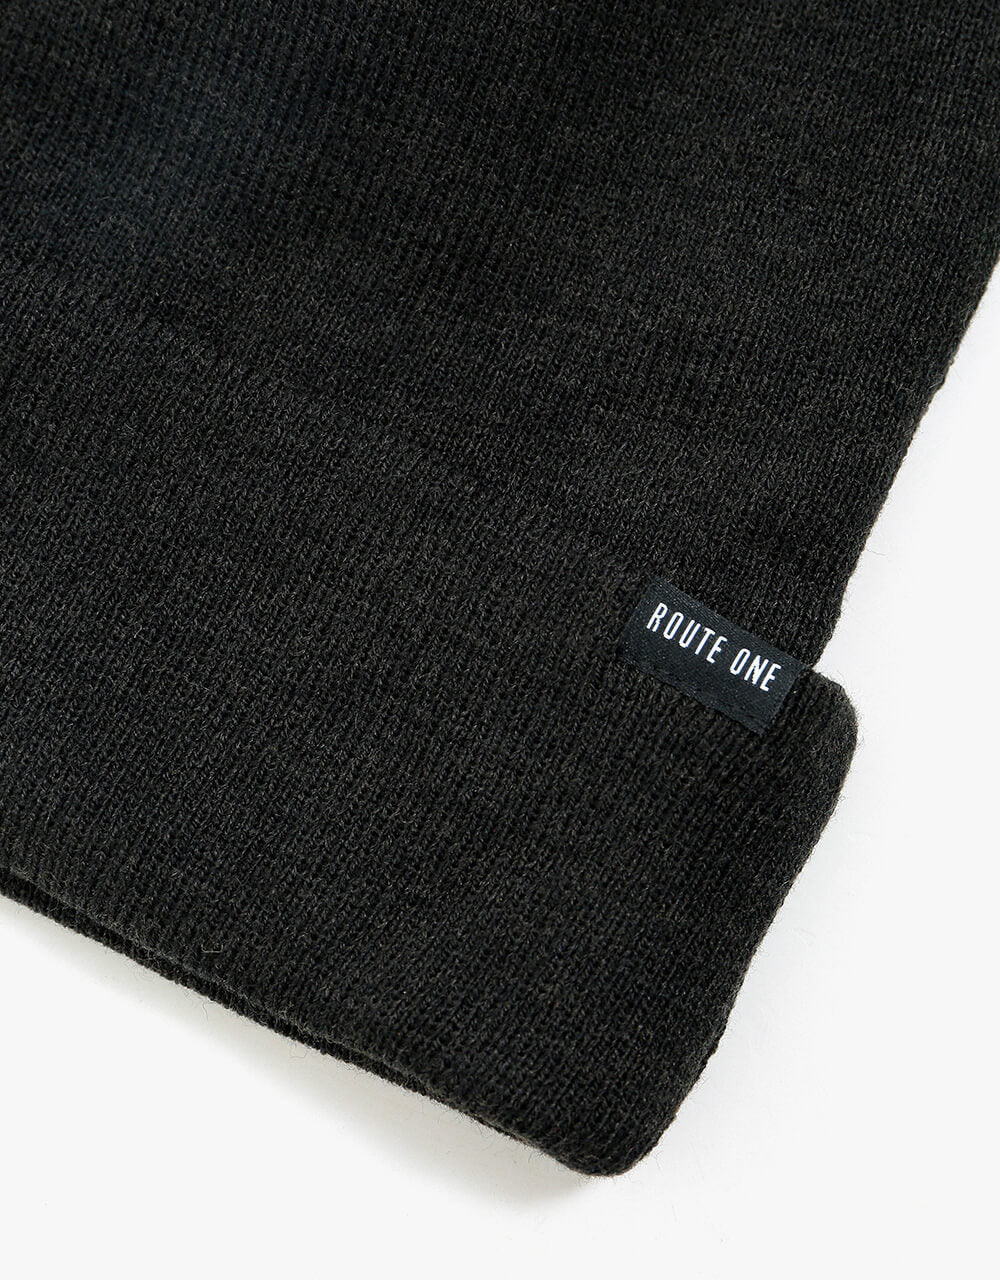 Route One Recycled NY Cuff Beanie - Black